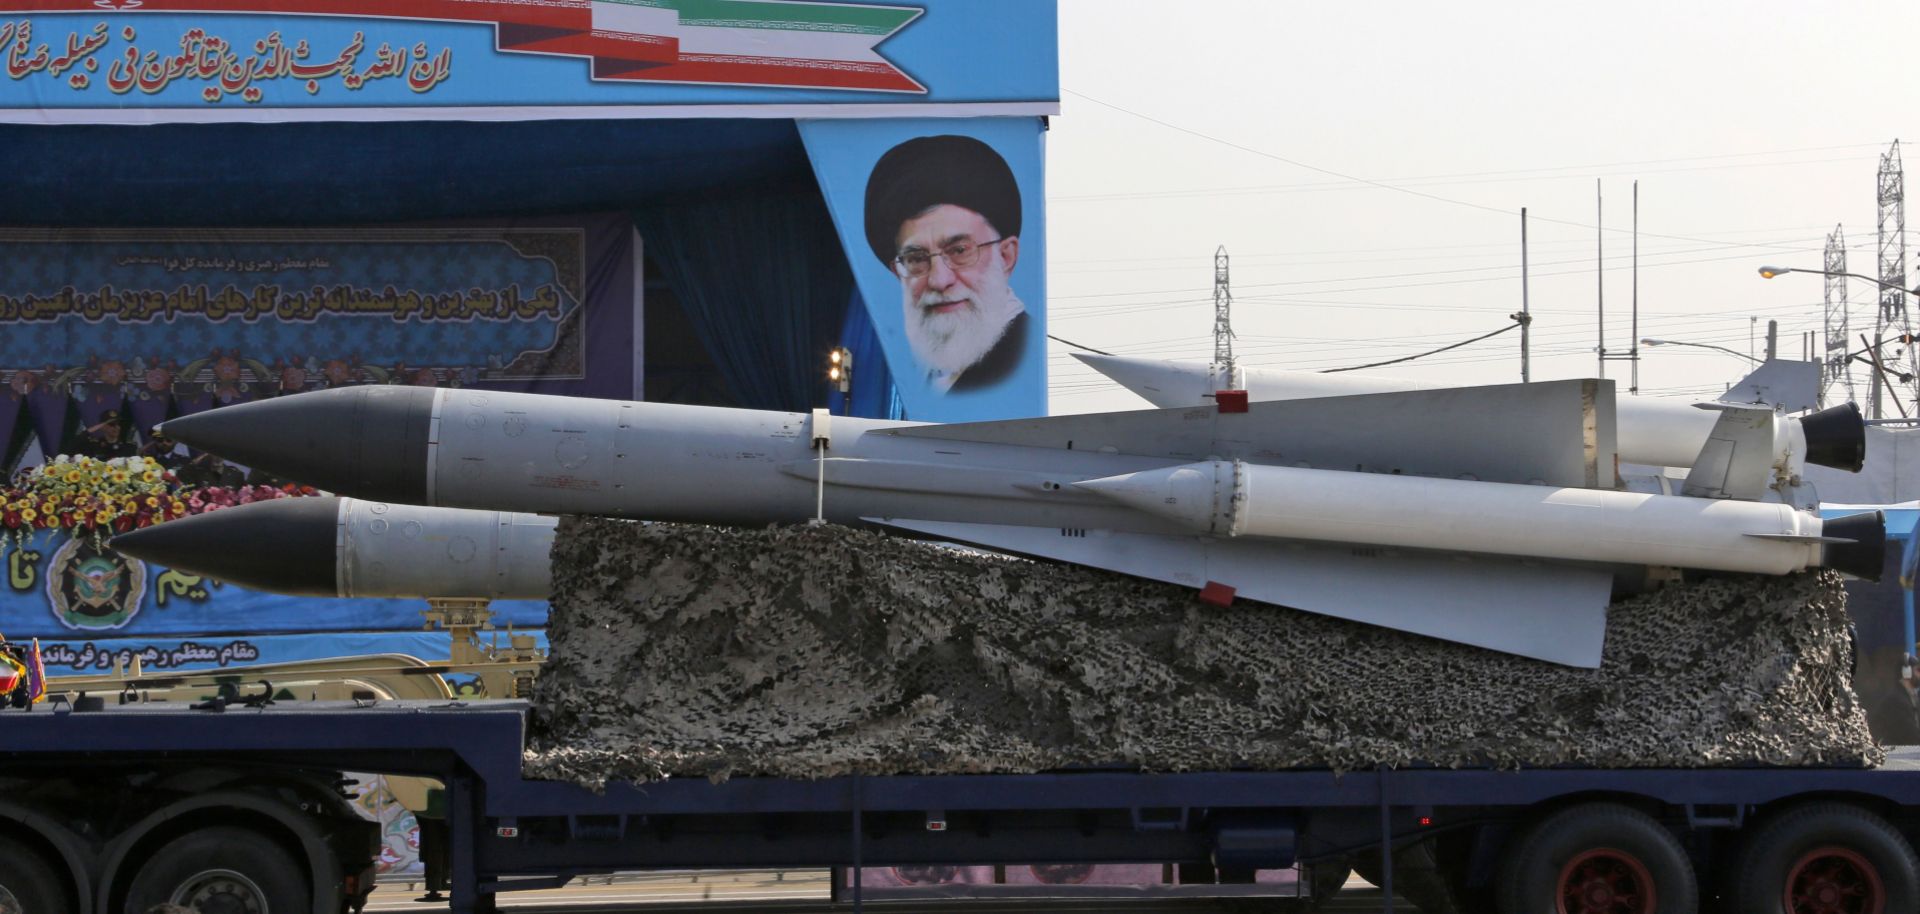 An Iranian military truck carries surface-to-air missiles past a portrait of Iran's Supreme Leader Ayatollah Ali Khamenei during a military parade in Tehran.